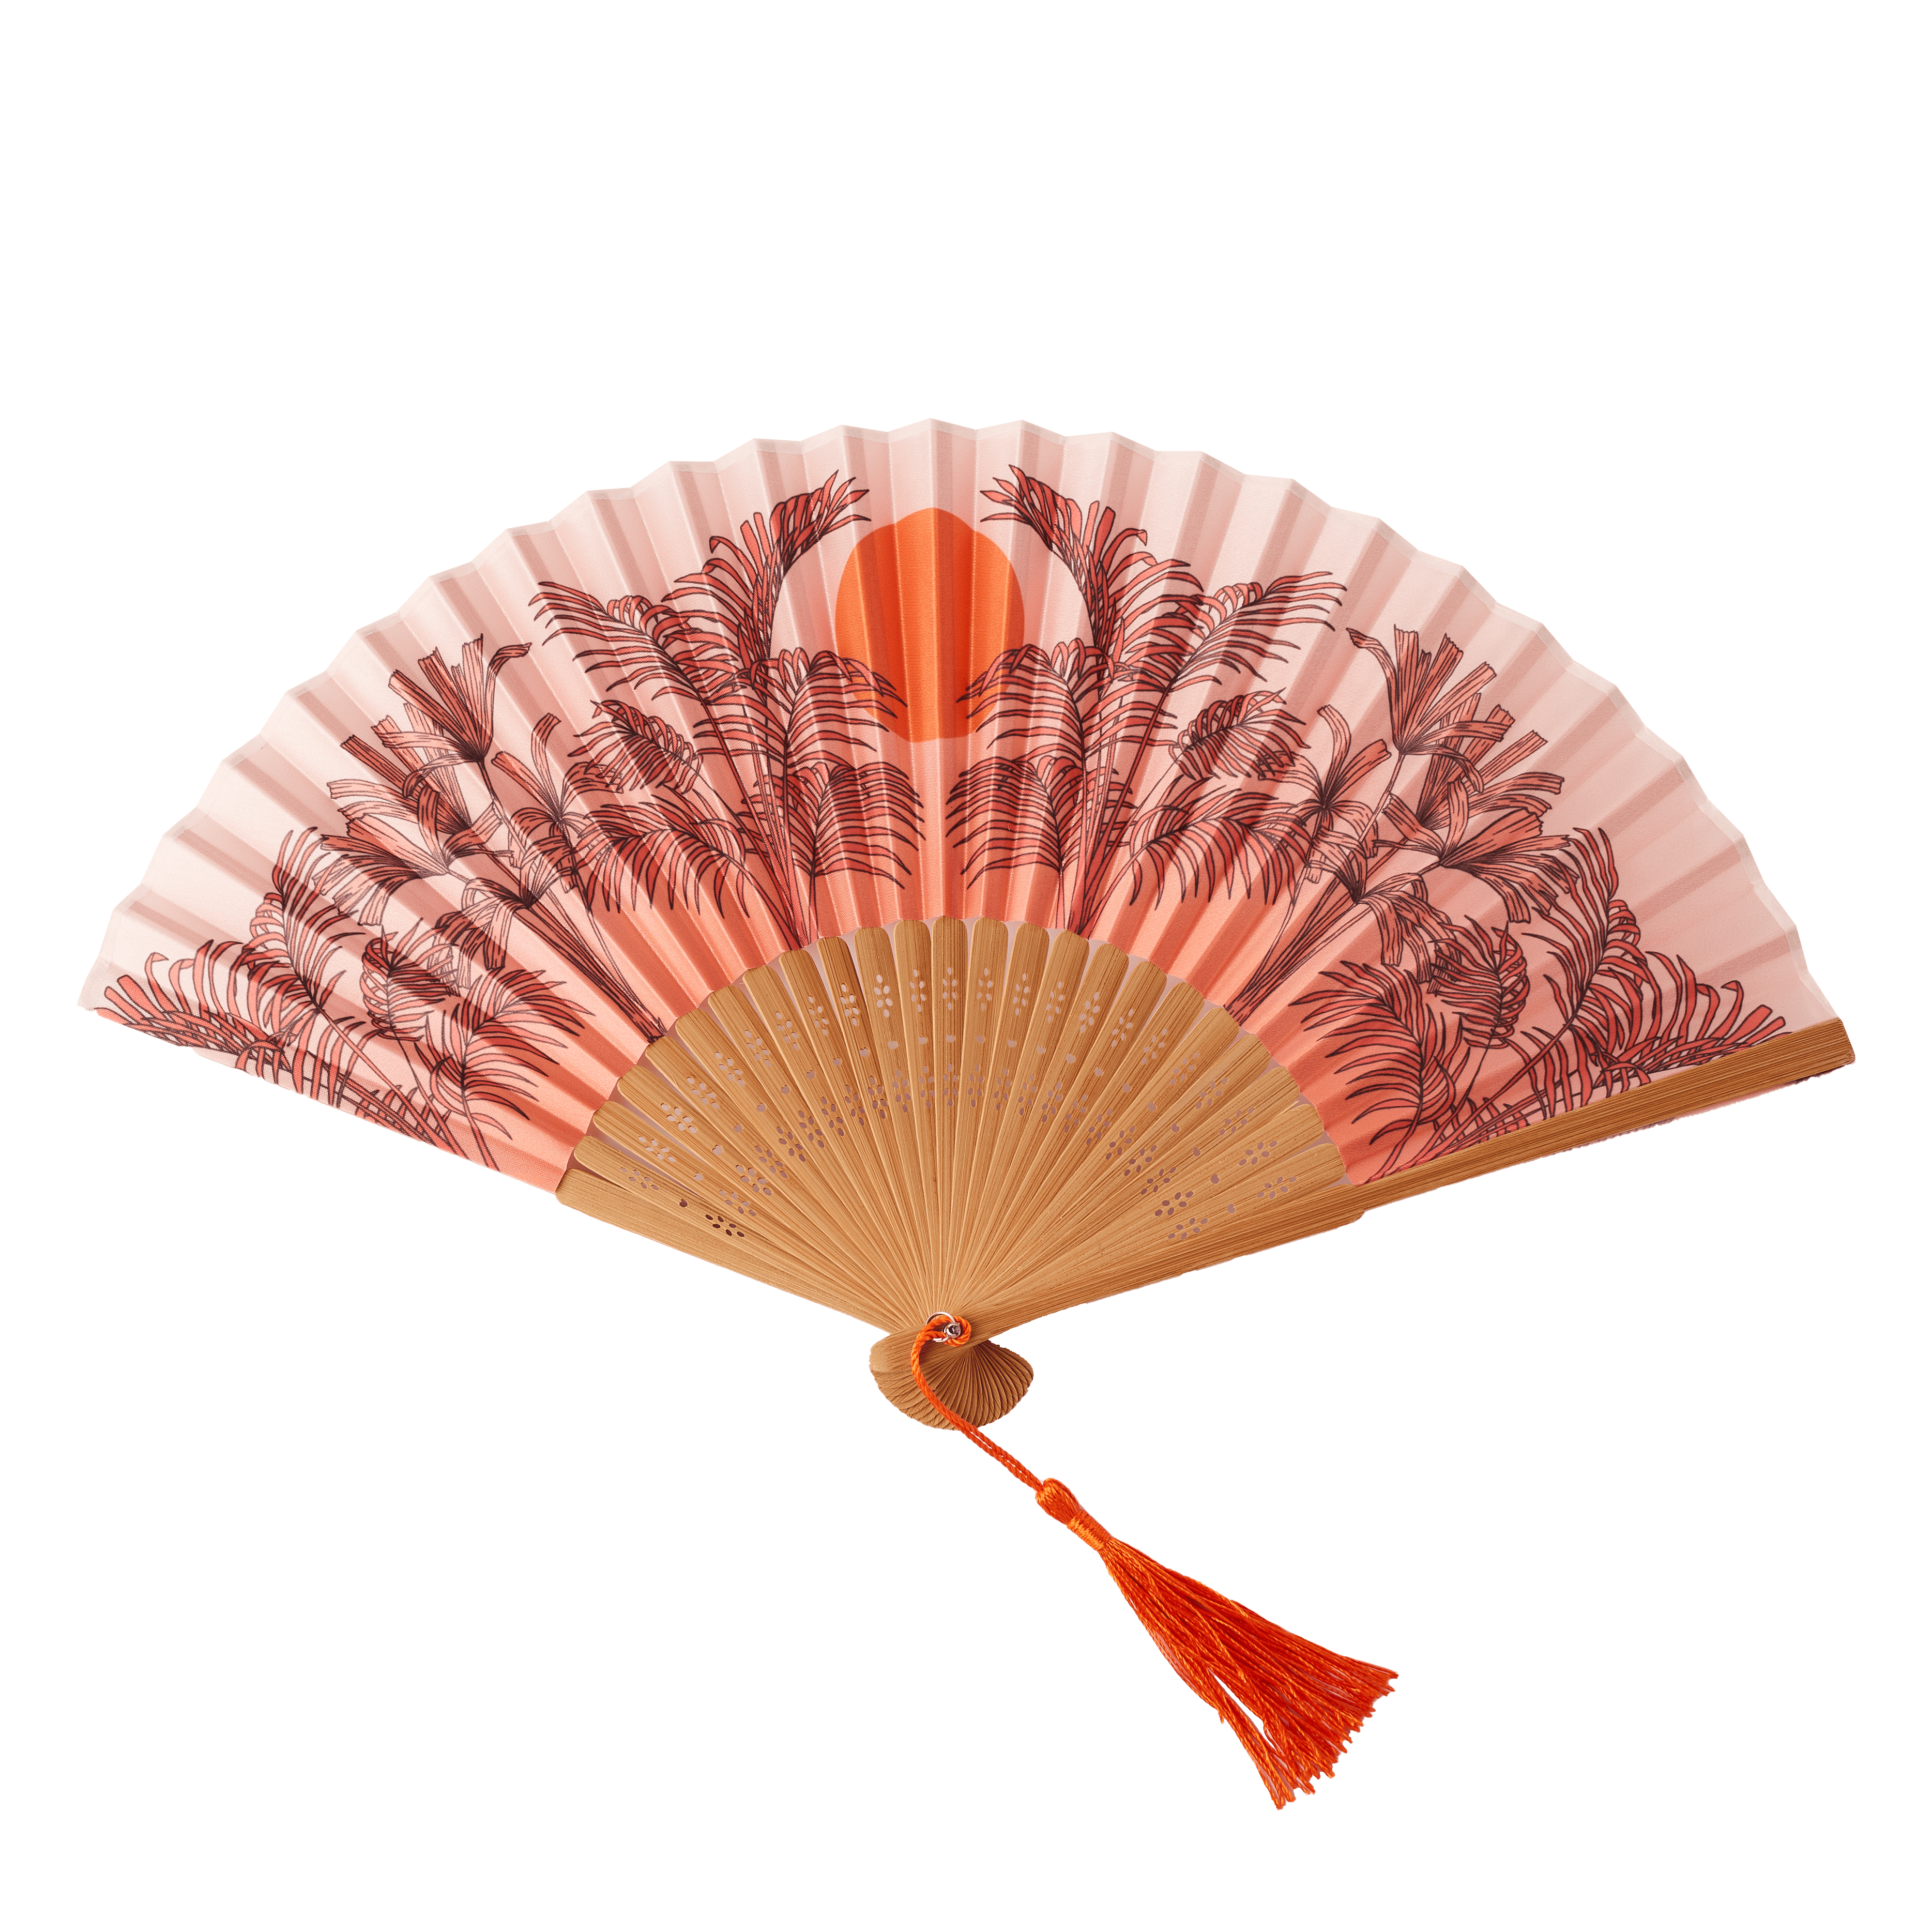 Small Folding Fan in Peachy Orange - Out of the Blue